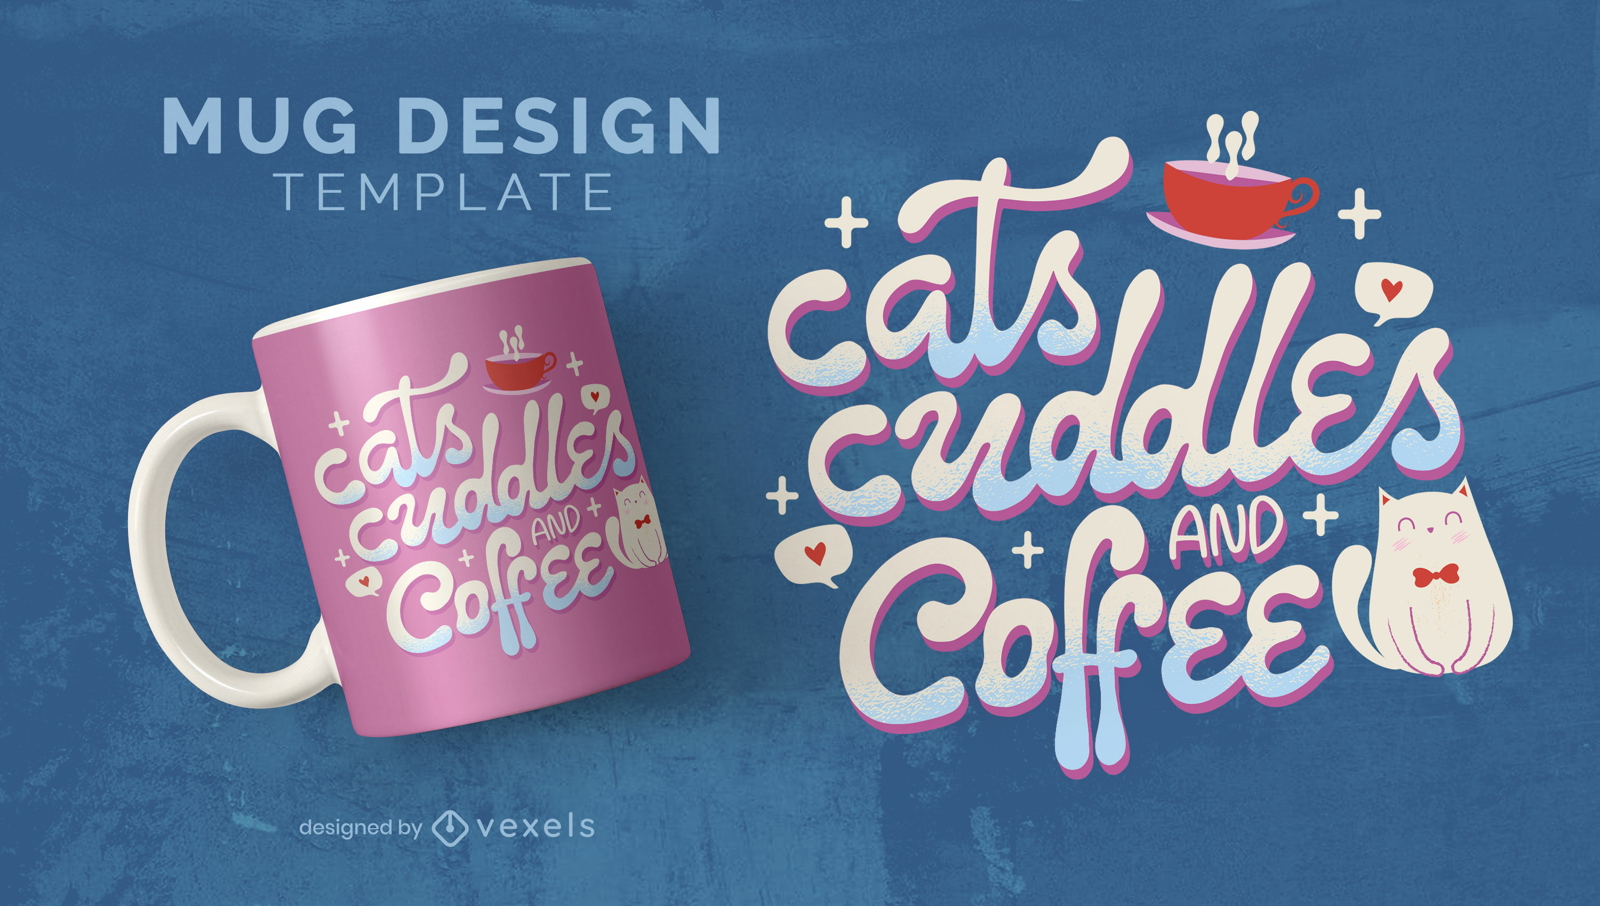 Cats and coffee lettering mug design